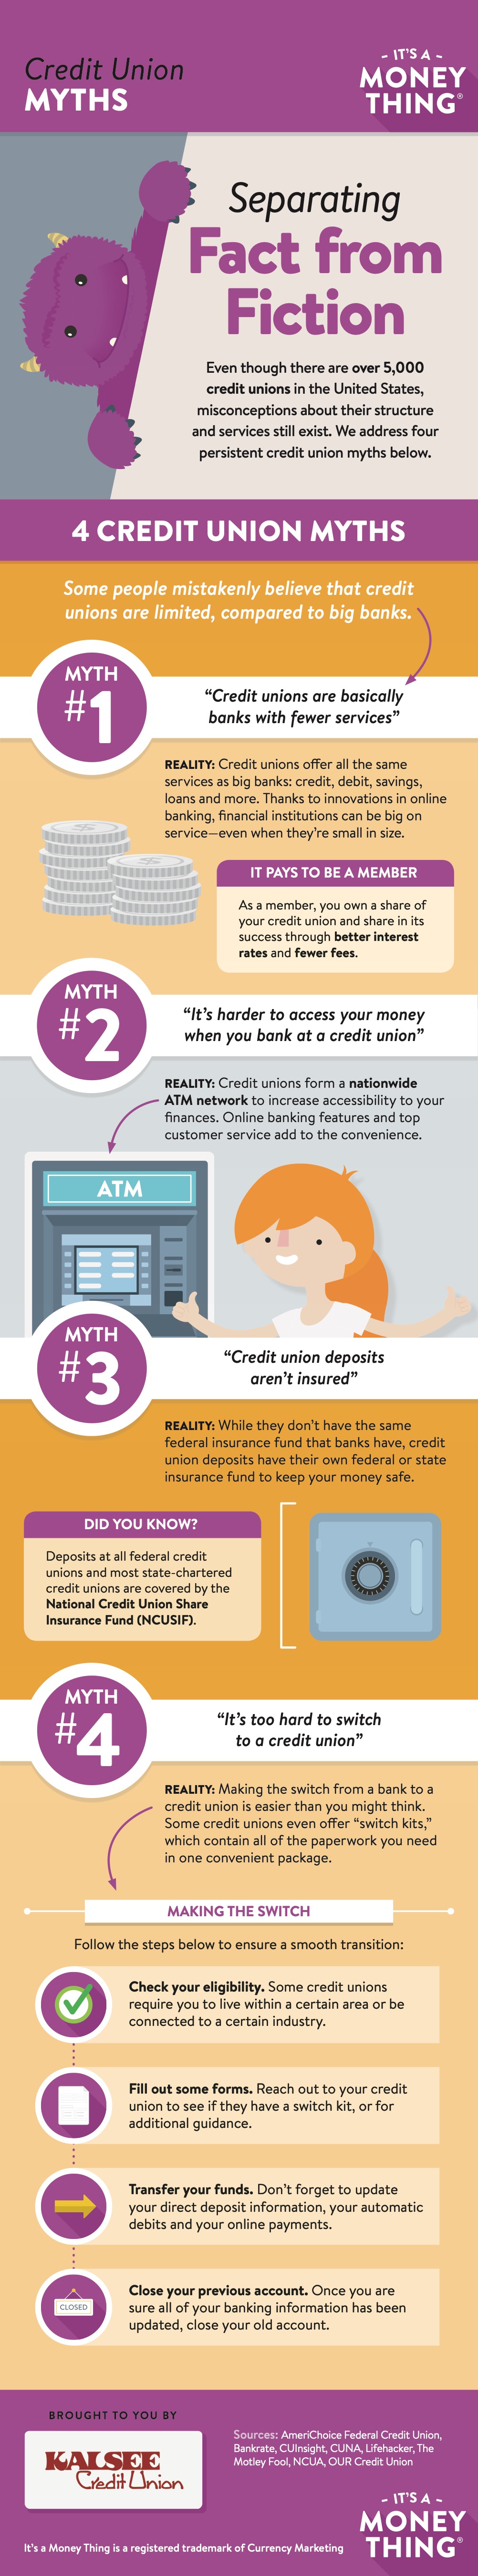 Credit union myths infographic, click for transcription